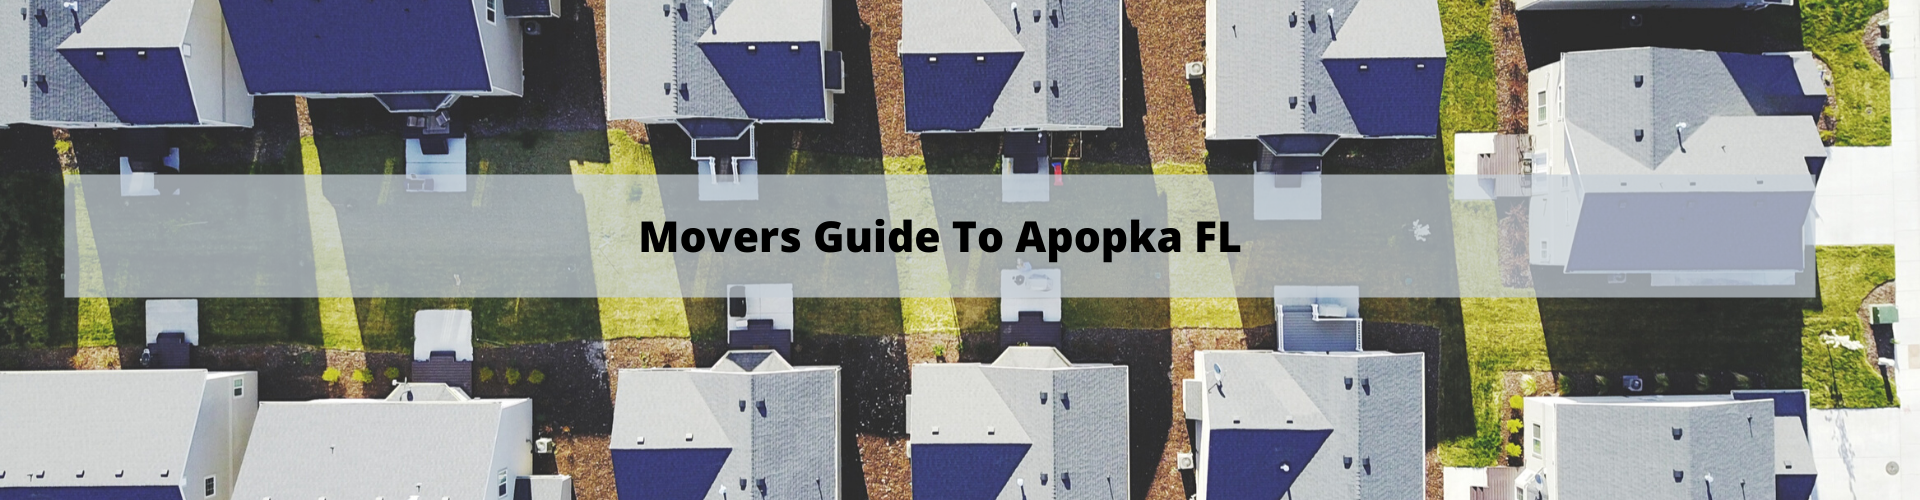 Movers Guide To Apopka FL